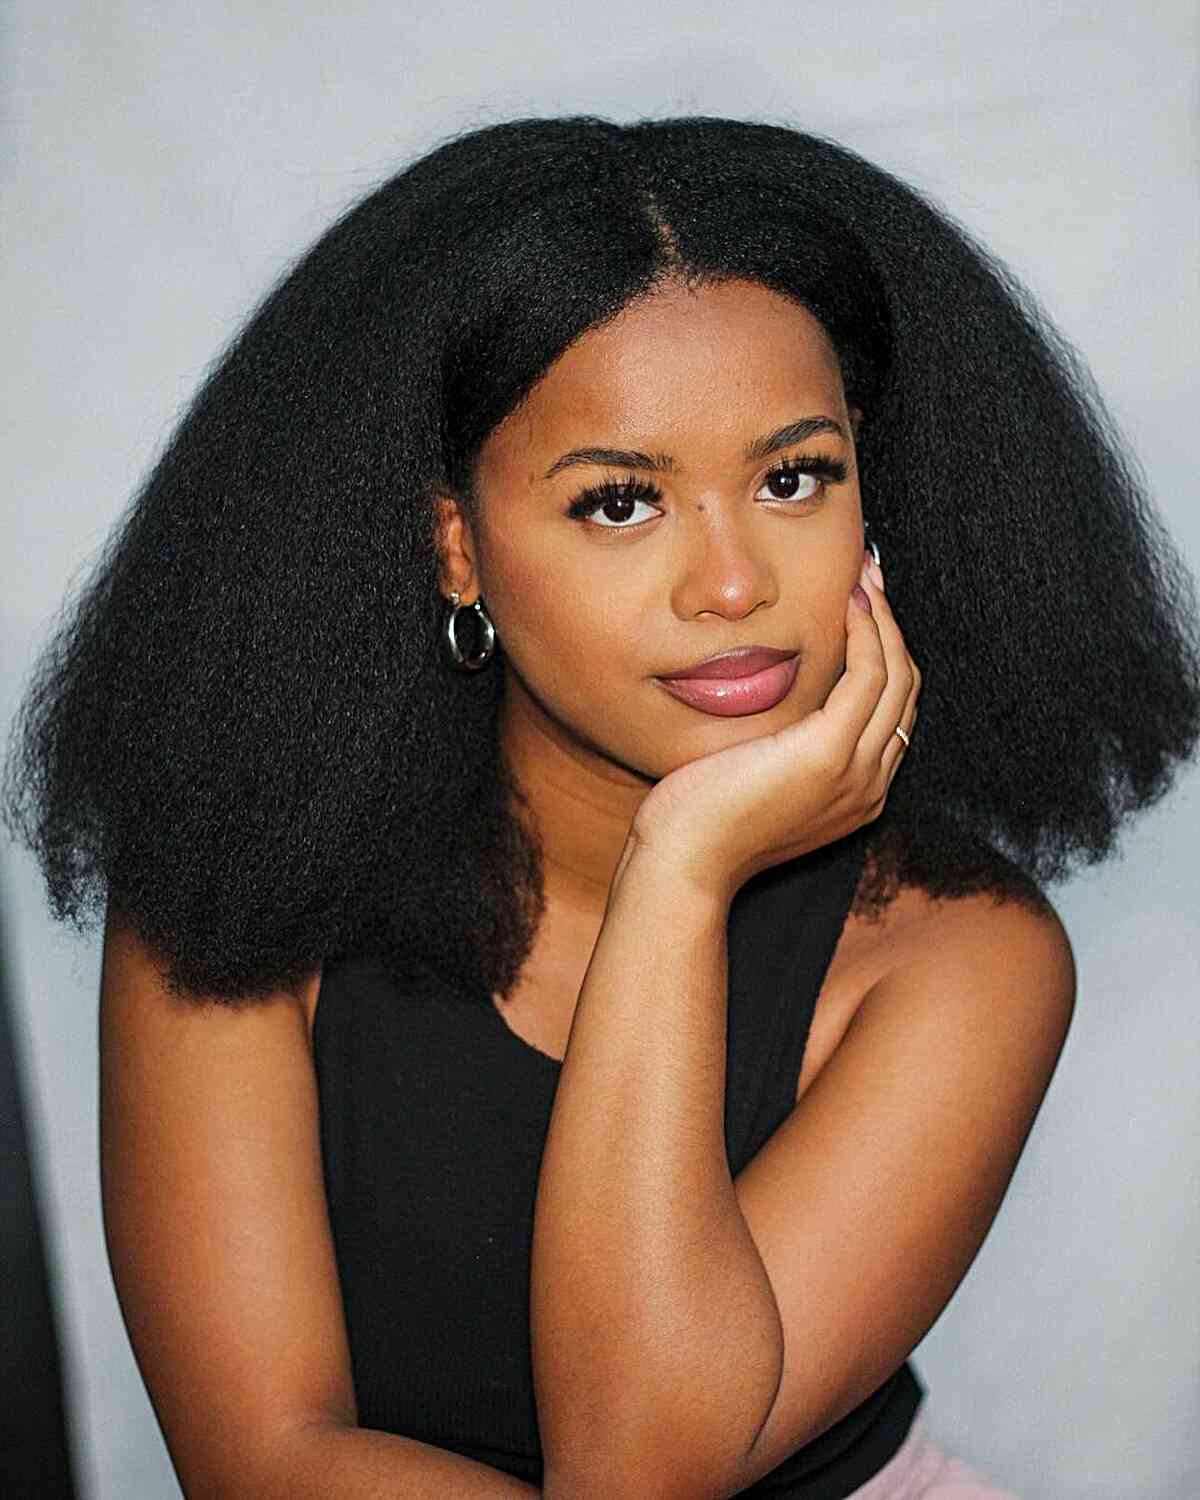 Center-Parted Thick Style with Layers on a Shoulder-Length Cut and Kinky Black Hair